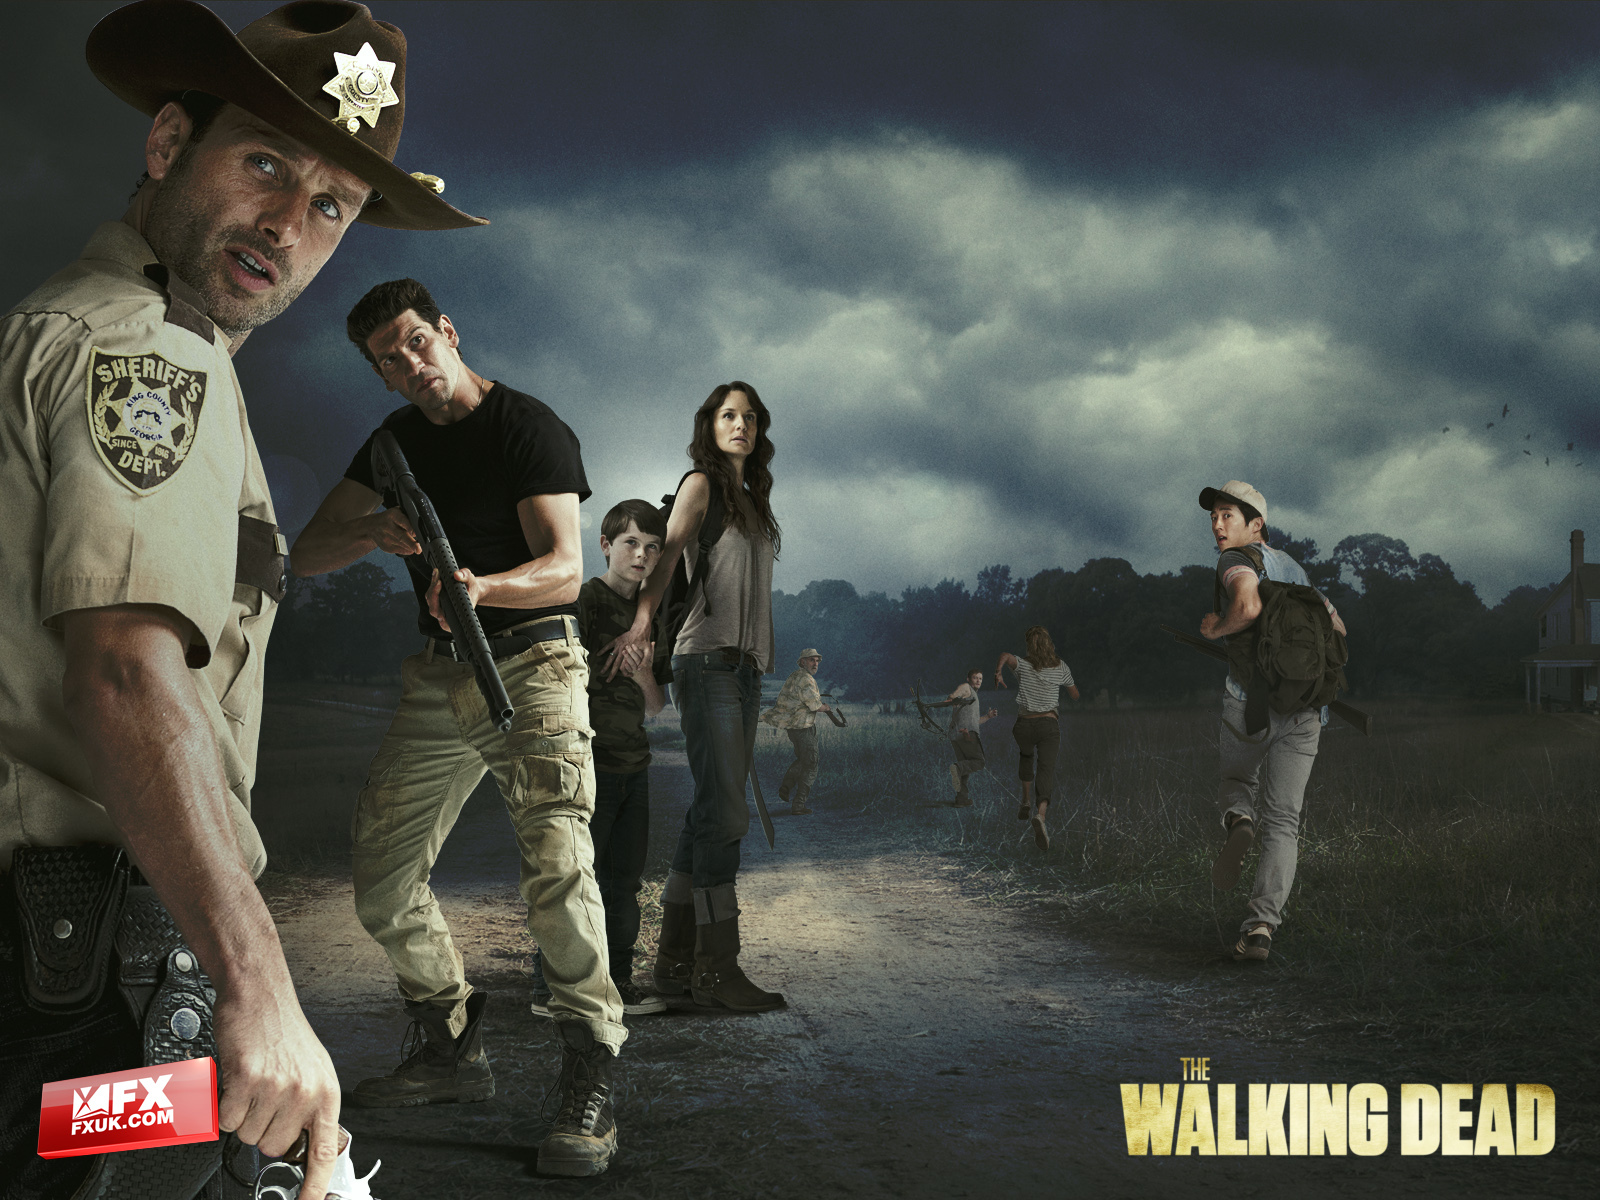 The Walking Dead Image HD Wallpaper And Background